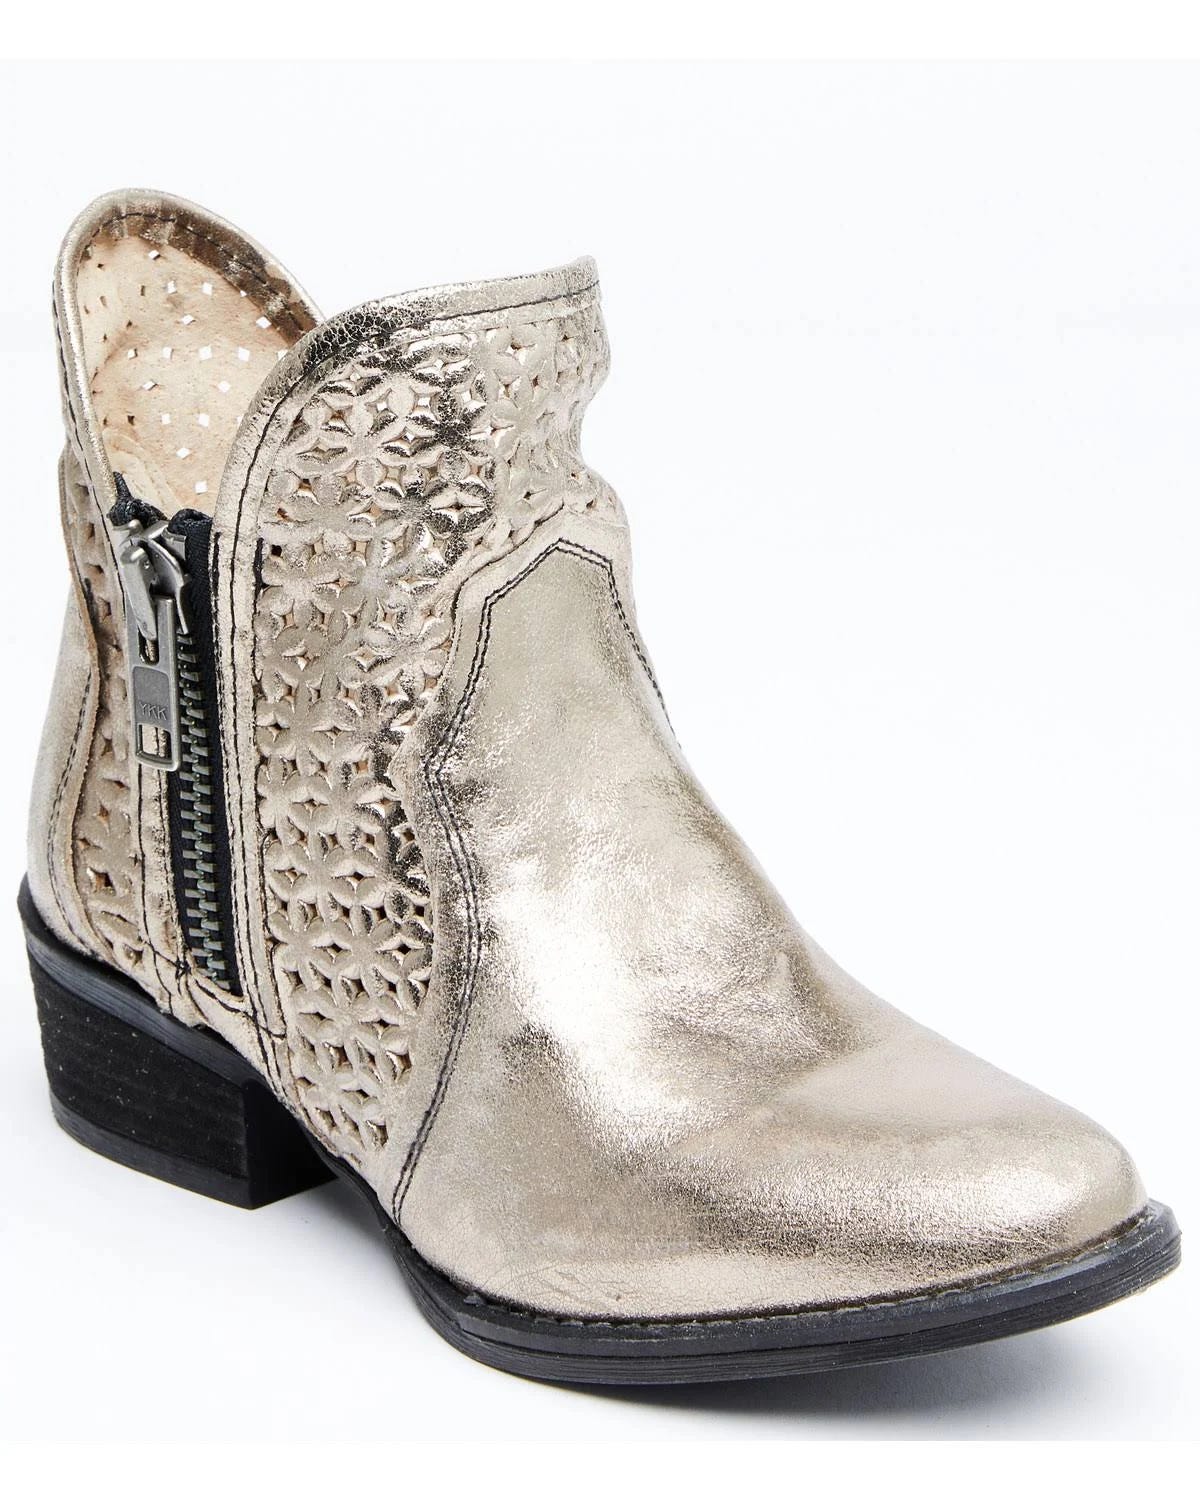 Stylish Silver Cowboy Boots with Round Toe and Perforated Design | Image